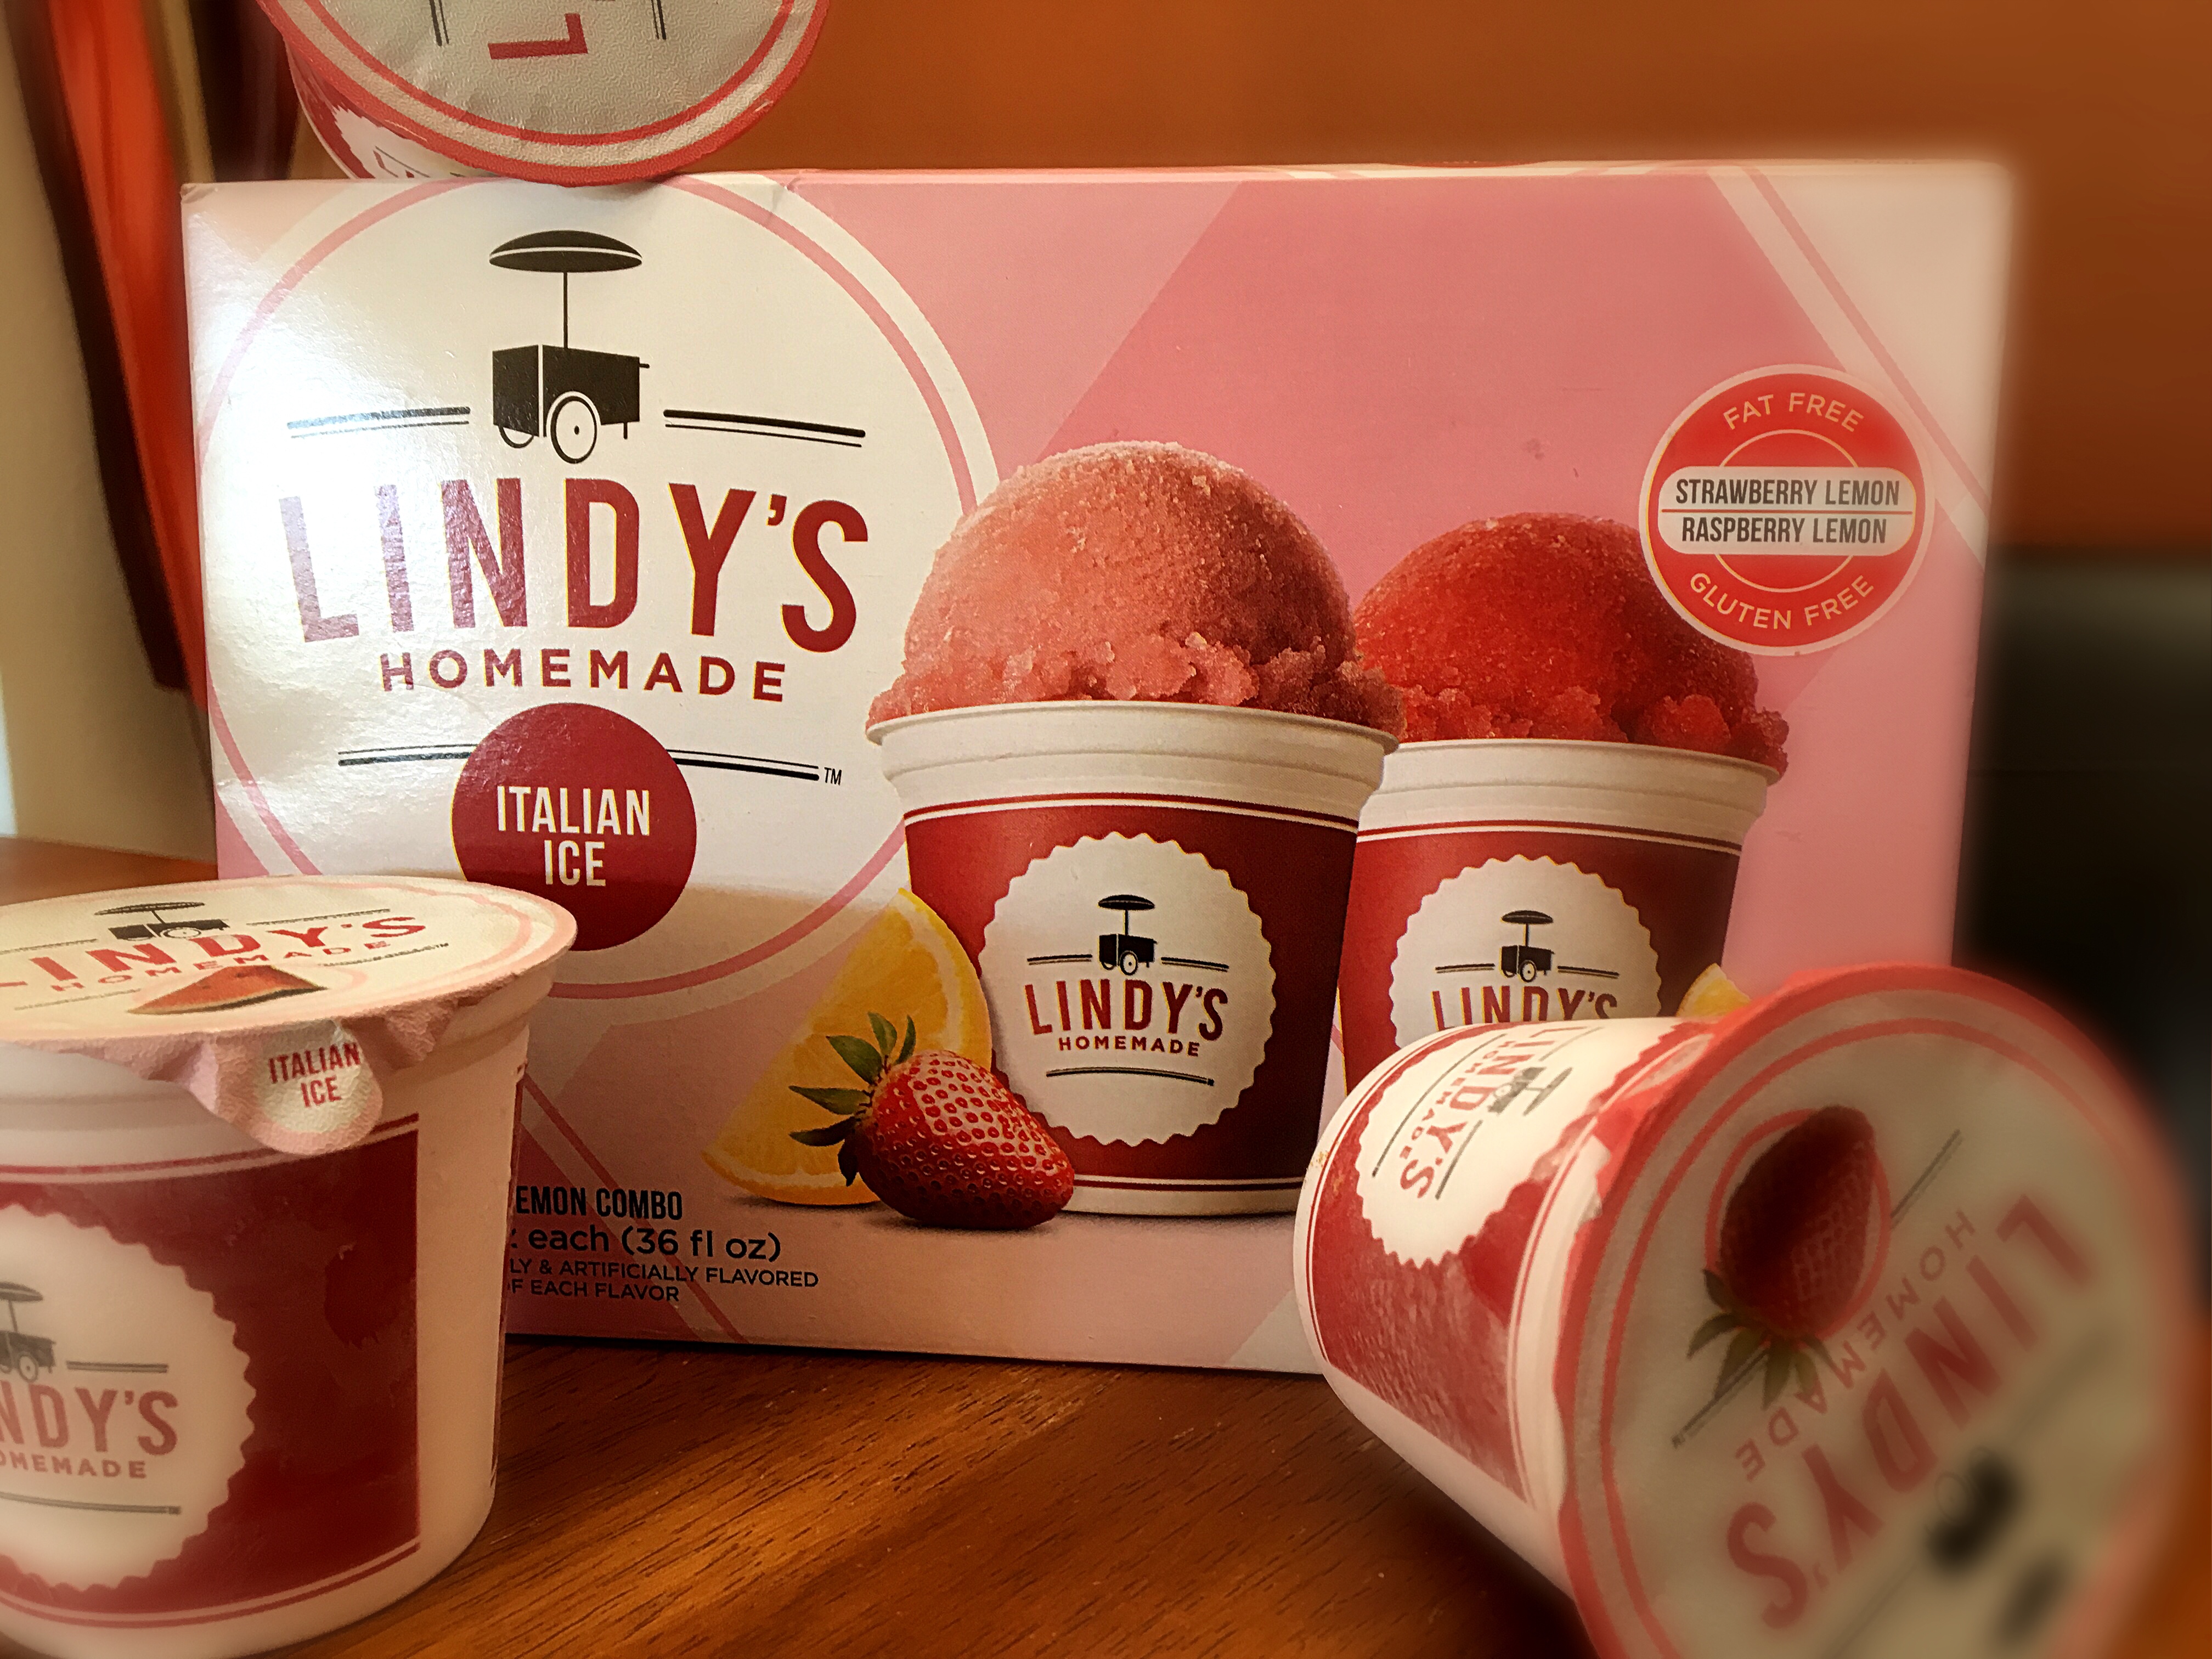 Lindy’s Homemade Italian Ice and Drink Recipes